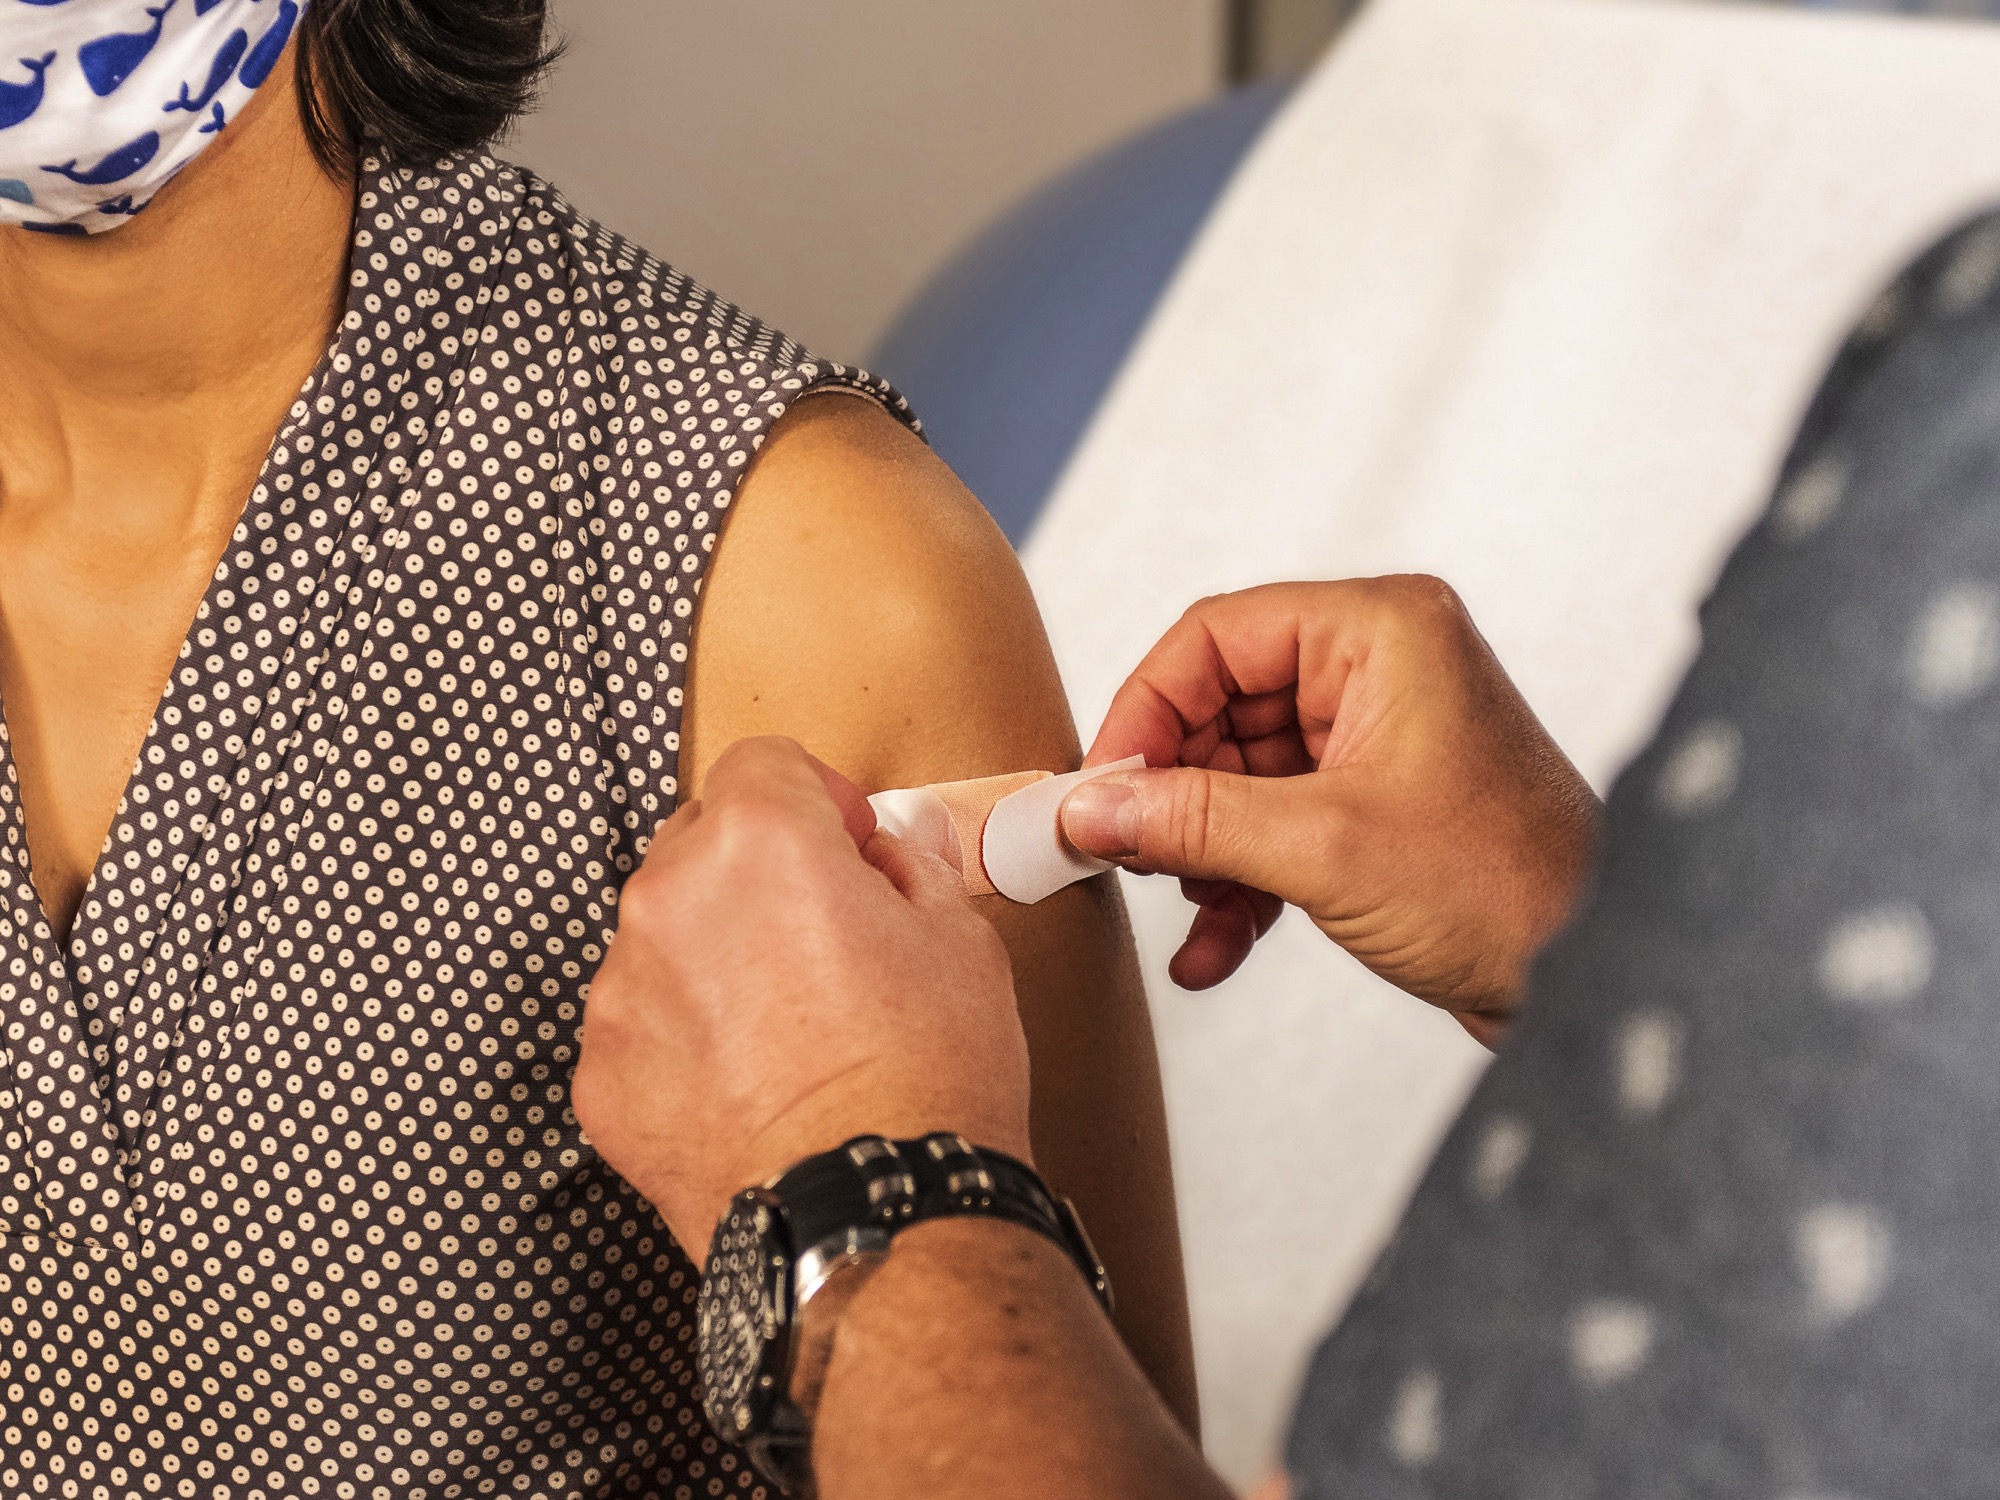 COVID vaccine hesitancy is showing up in unexpected places